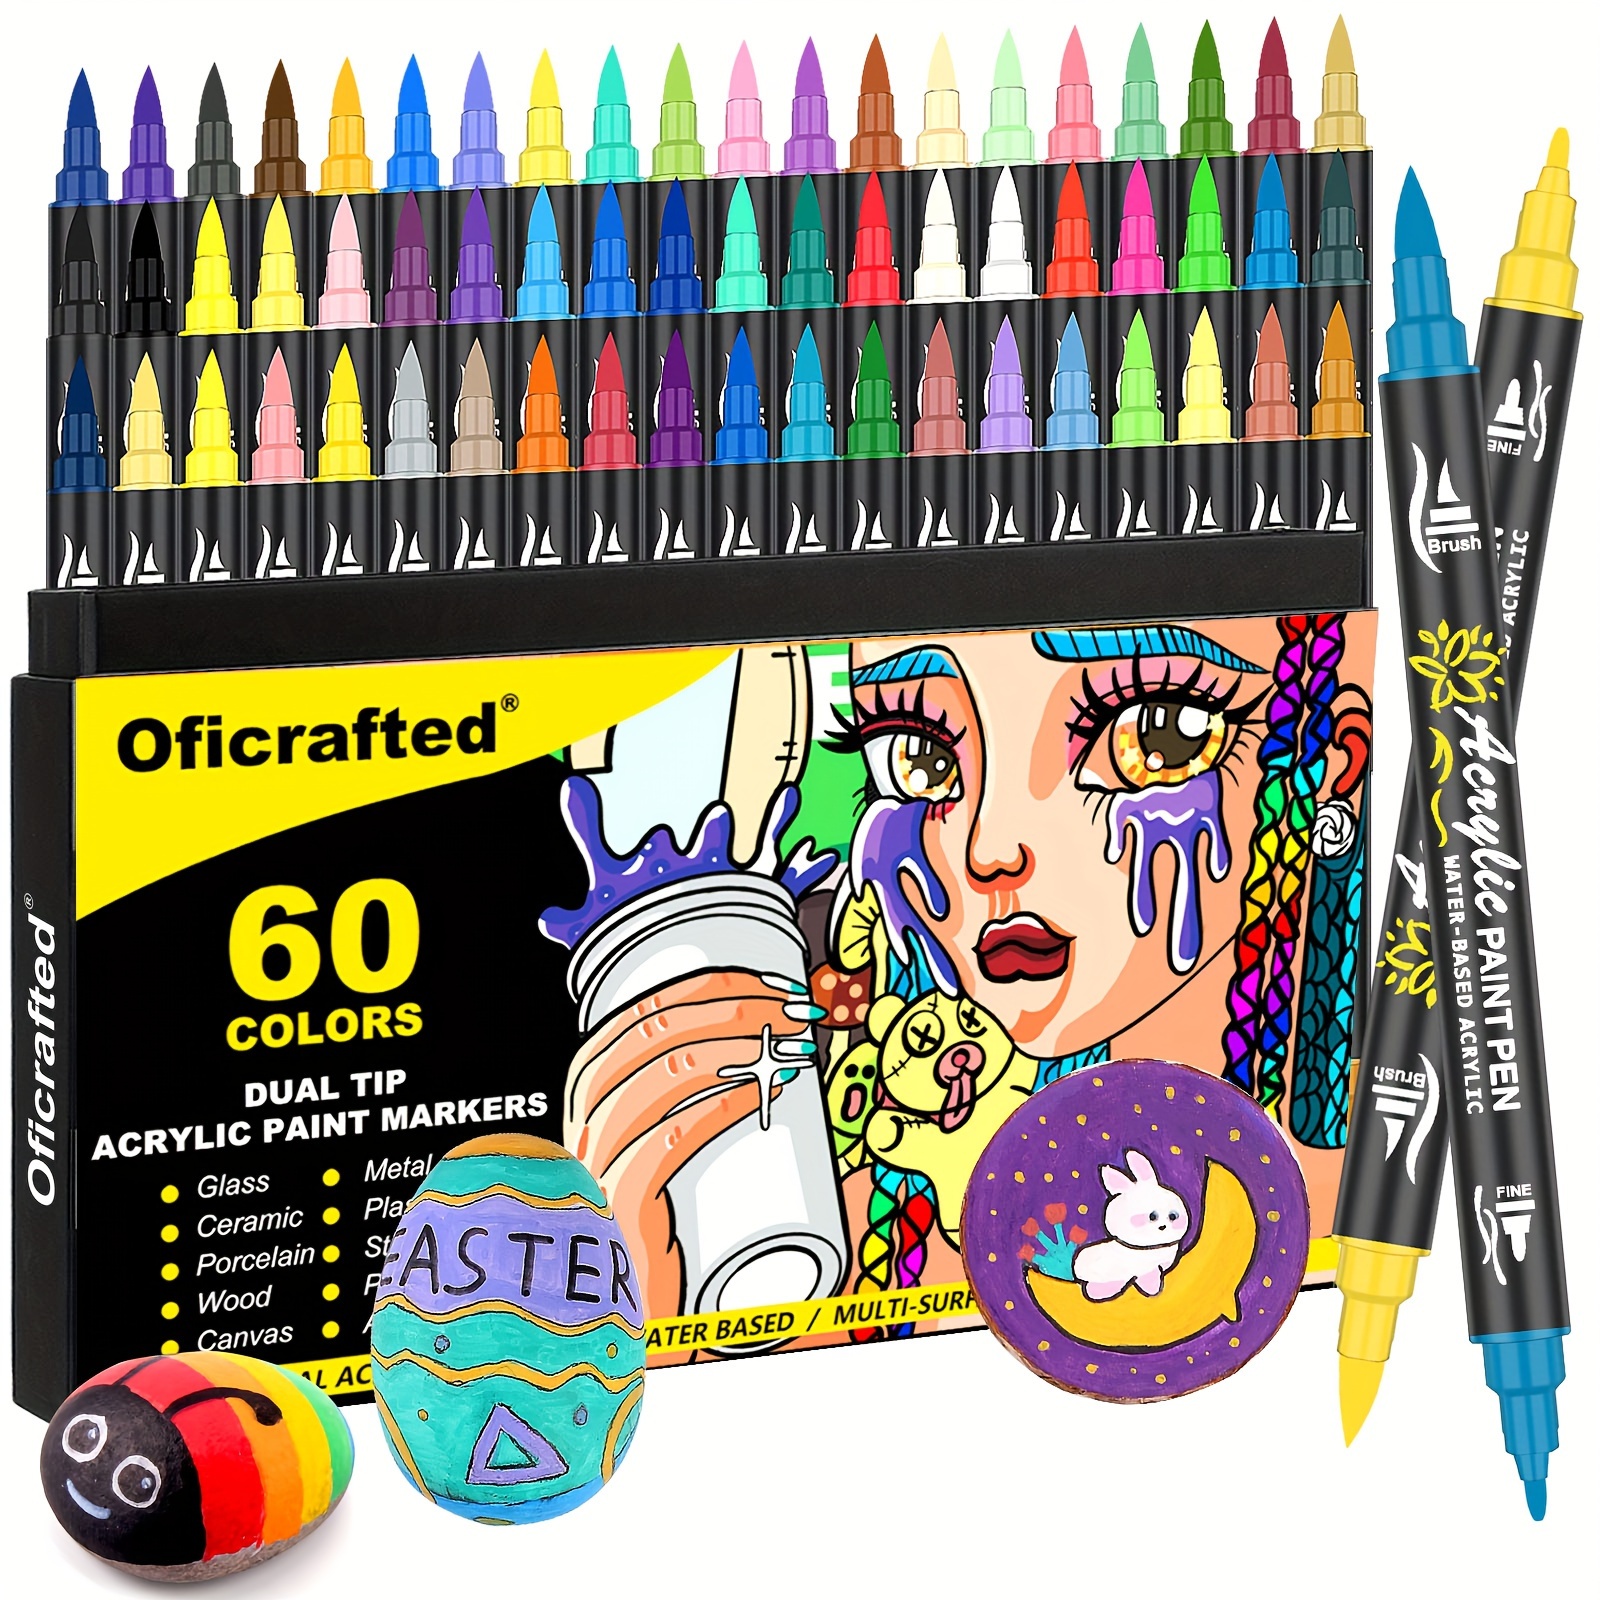 

60-piece Acrylic Paint Pen Set With Brushes & Fine Tips - Dual-tip For Rock, Wood, Glass, Ceramic Painting - Premium Markers For Office, Study, Art Supplies - Ideal For Diy Crafts